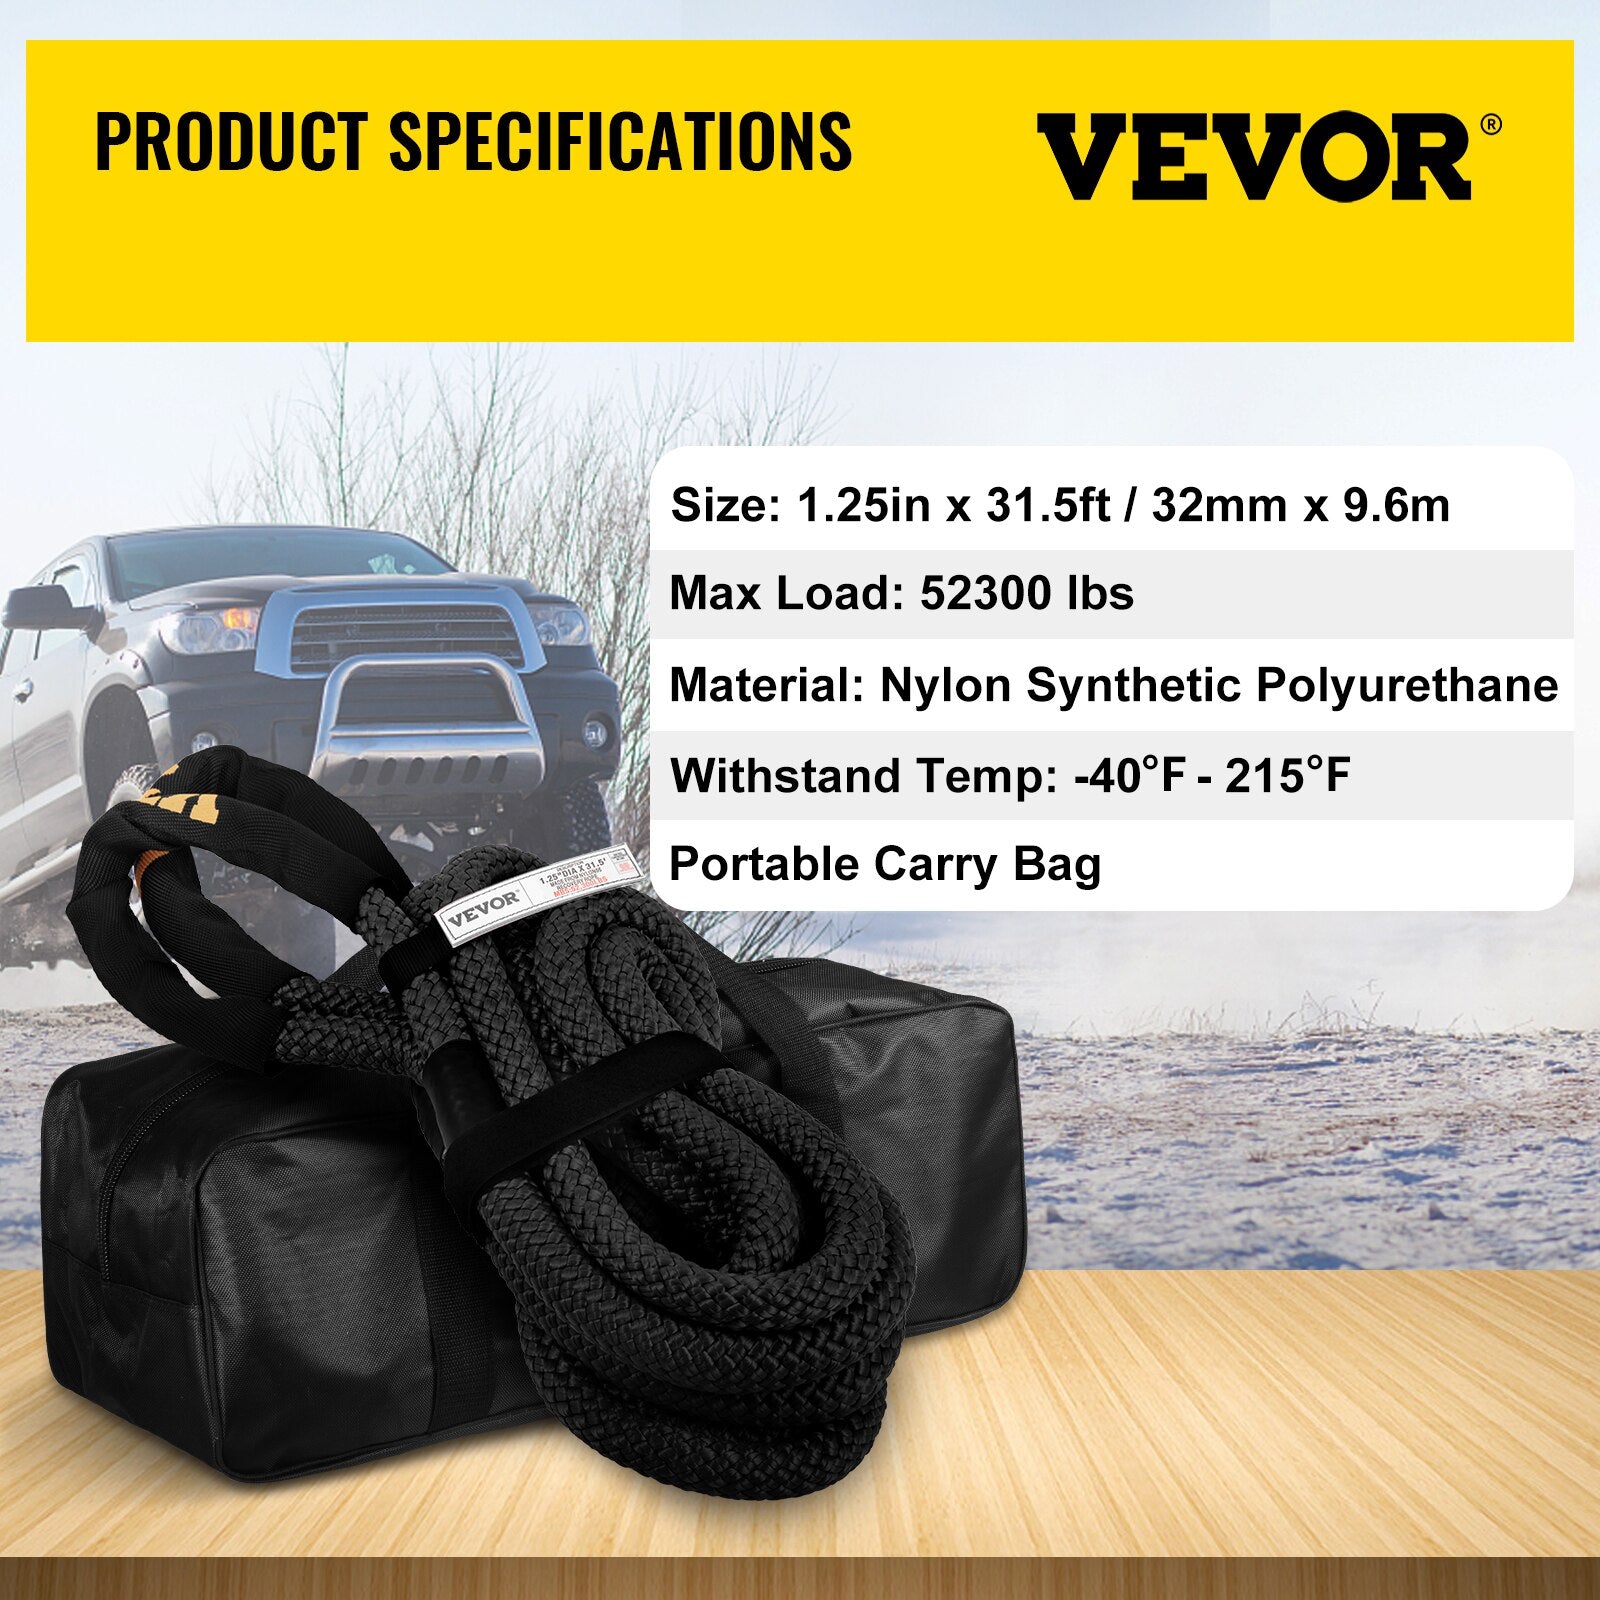 VEVOR Heavy Duty Recovery Tow Rope: Powerful and Reliable for